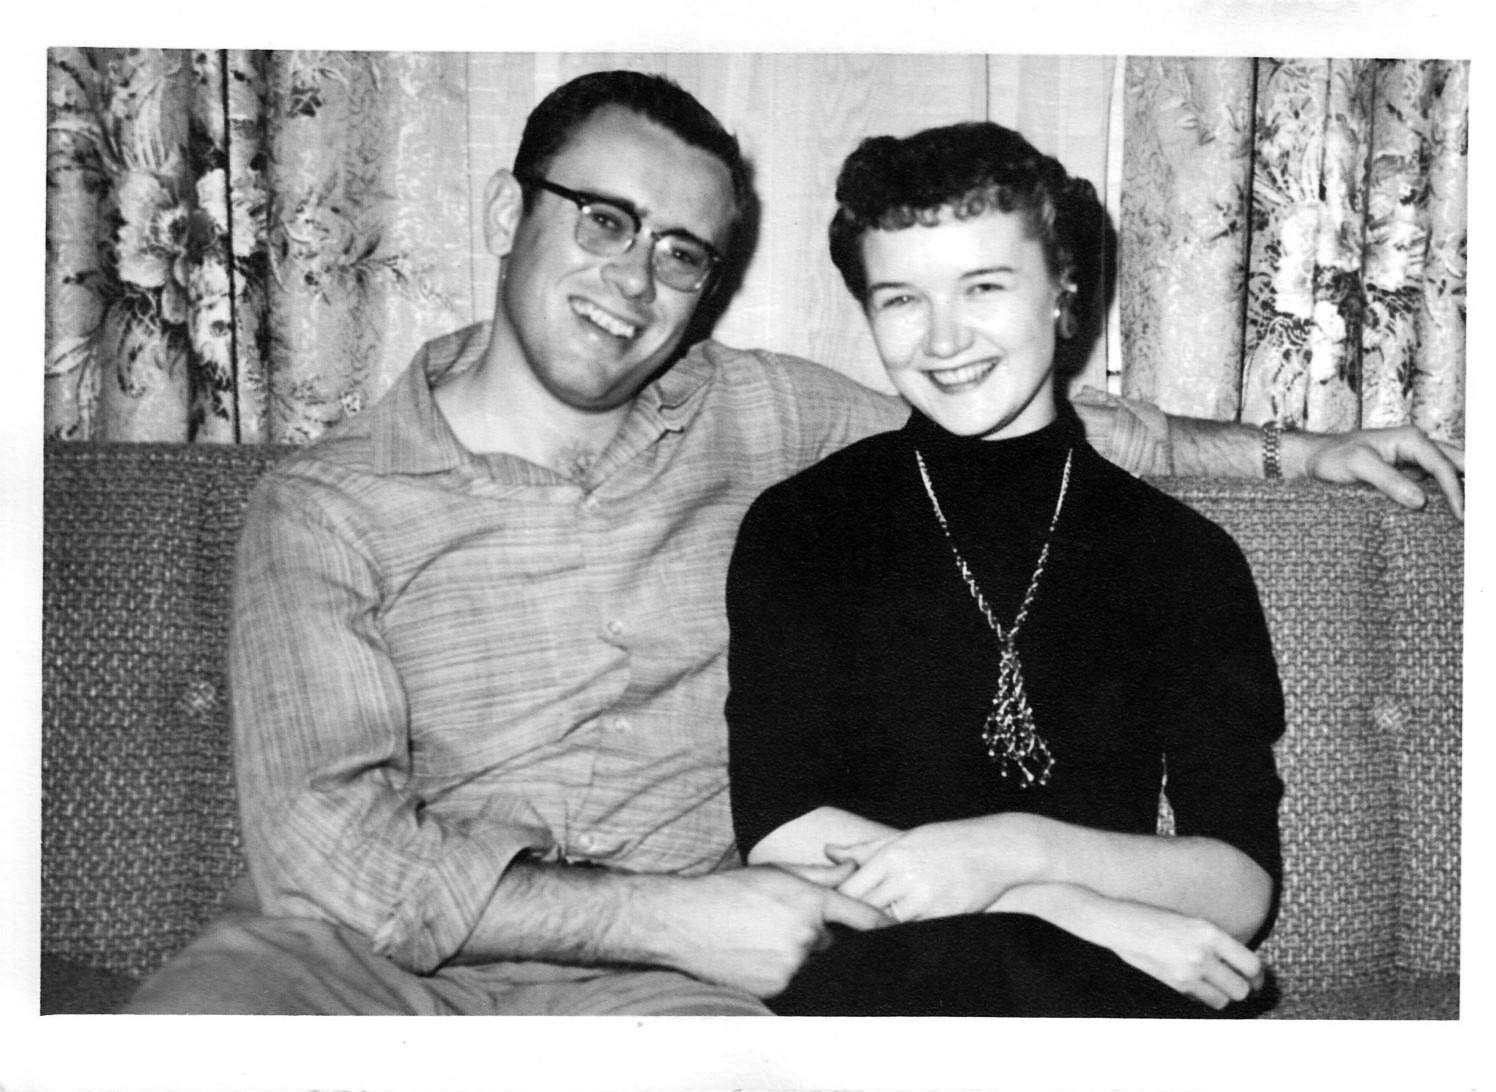 A young man with glasses and a young woman sitting on a couch next to each other and holding hands.